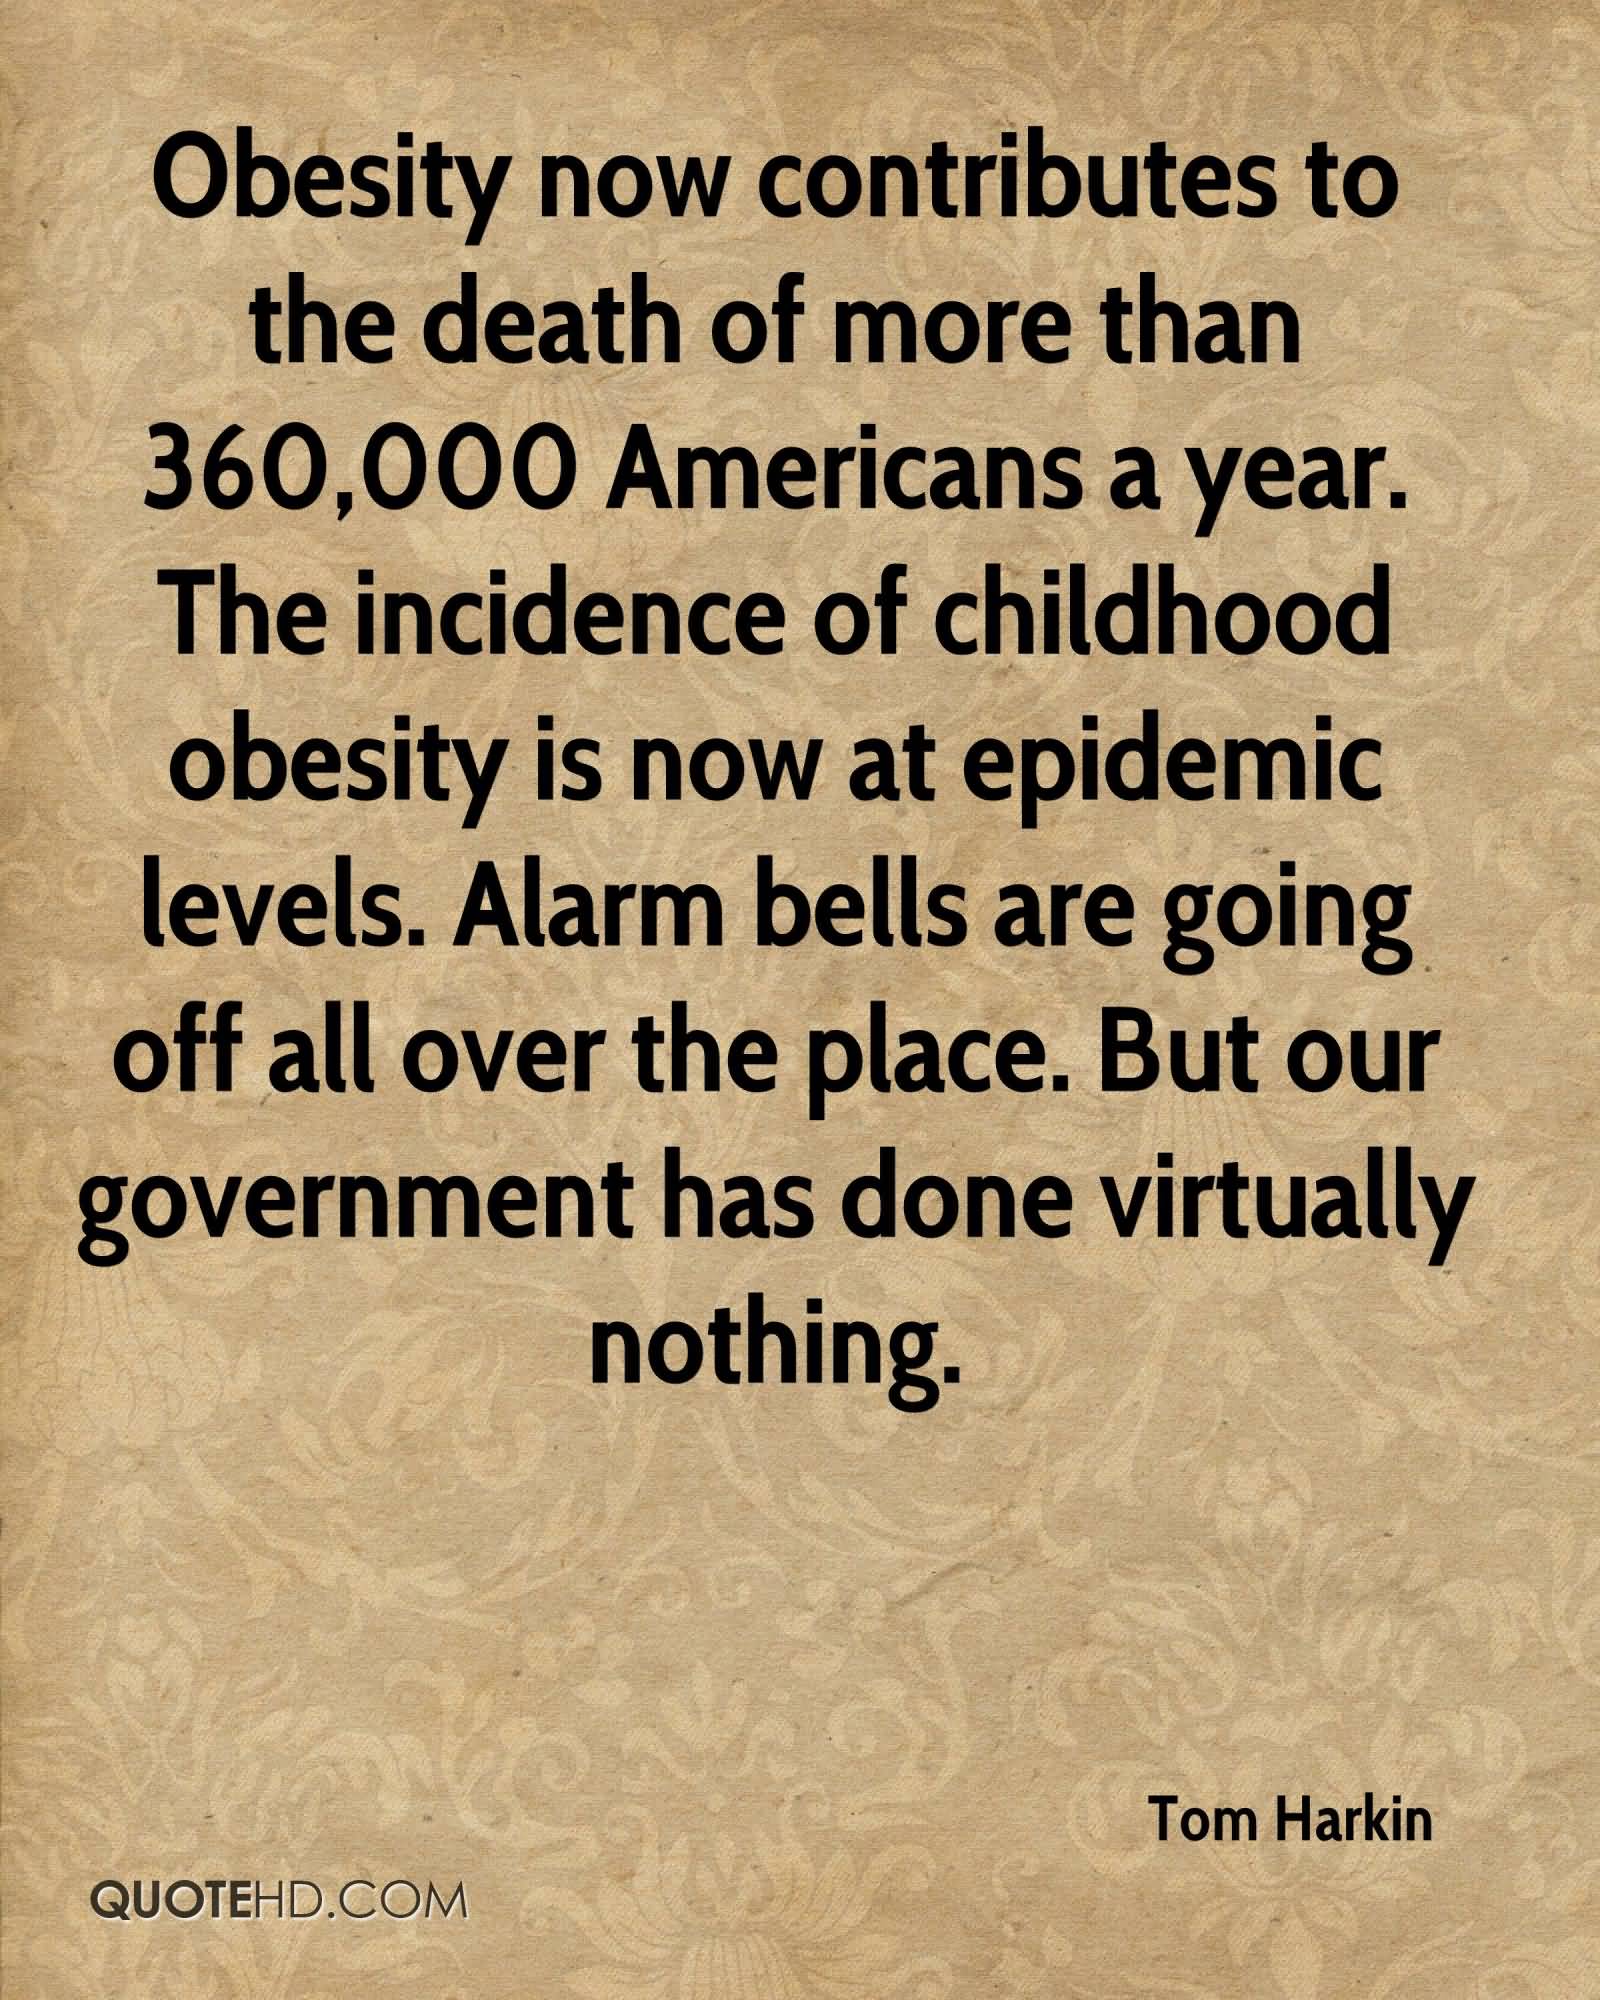 Obesity now contributes to the death of more than 360,000 Americans a year. The incidence of childhood obesity is now at epidemic levels. Alarm bells are going off all over the place. But our government has done virtually nothing.- Tom Harkin